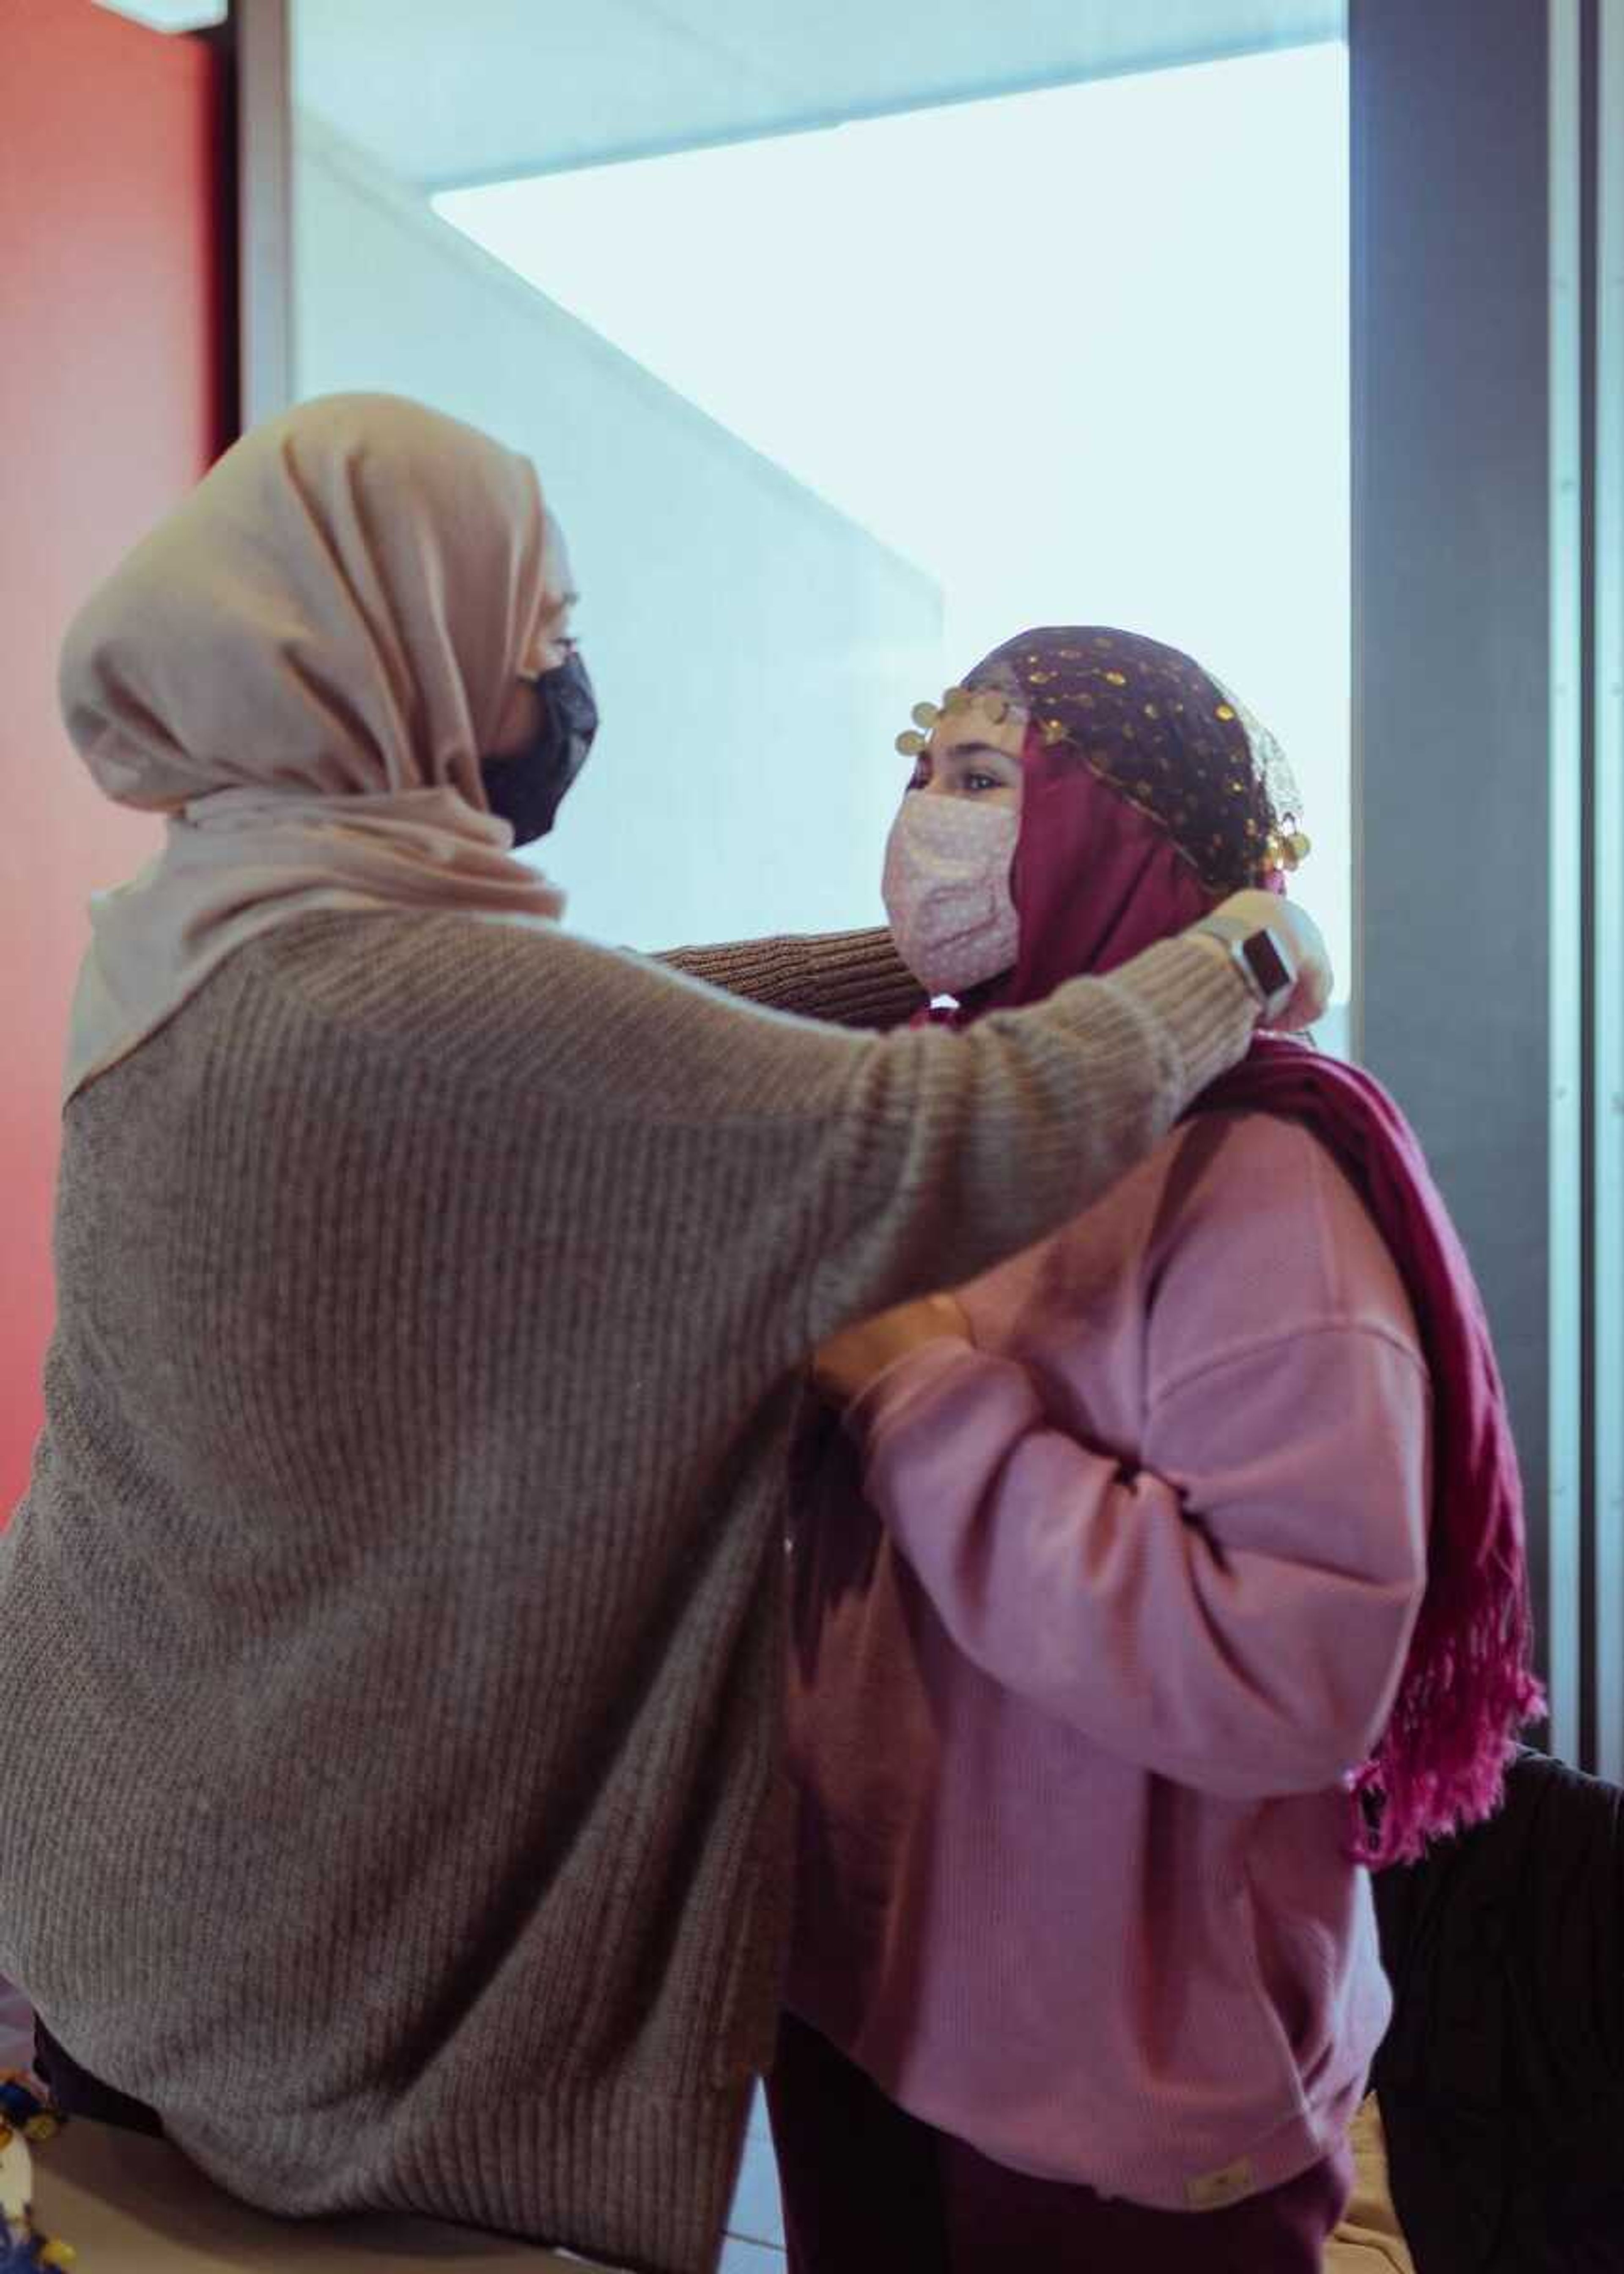 Shadan Roumany demonstrates putting a decorative headscarf onto Jowairia Khalid at the World Hijab Day put on by the Muslim Students Association.